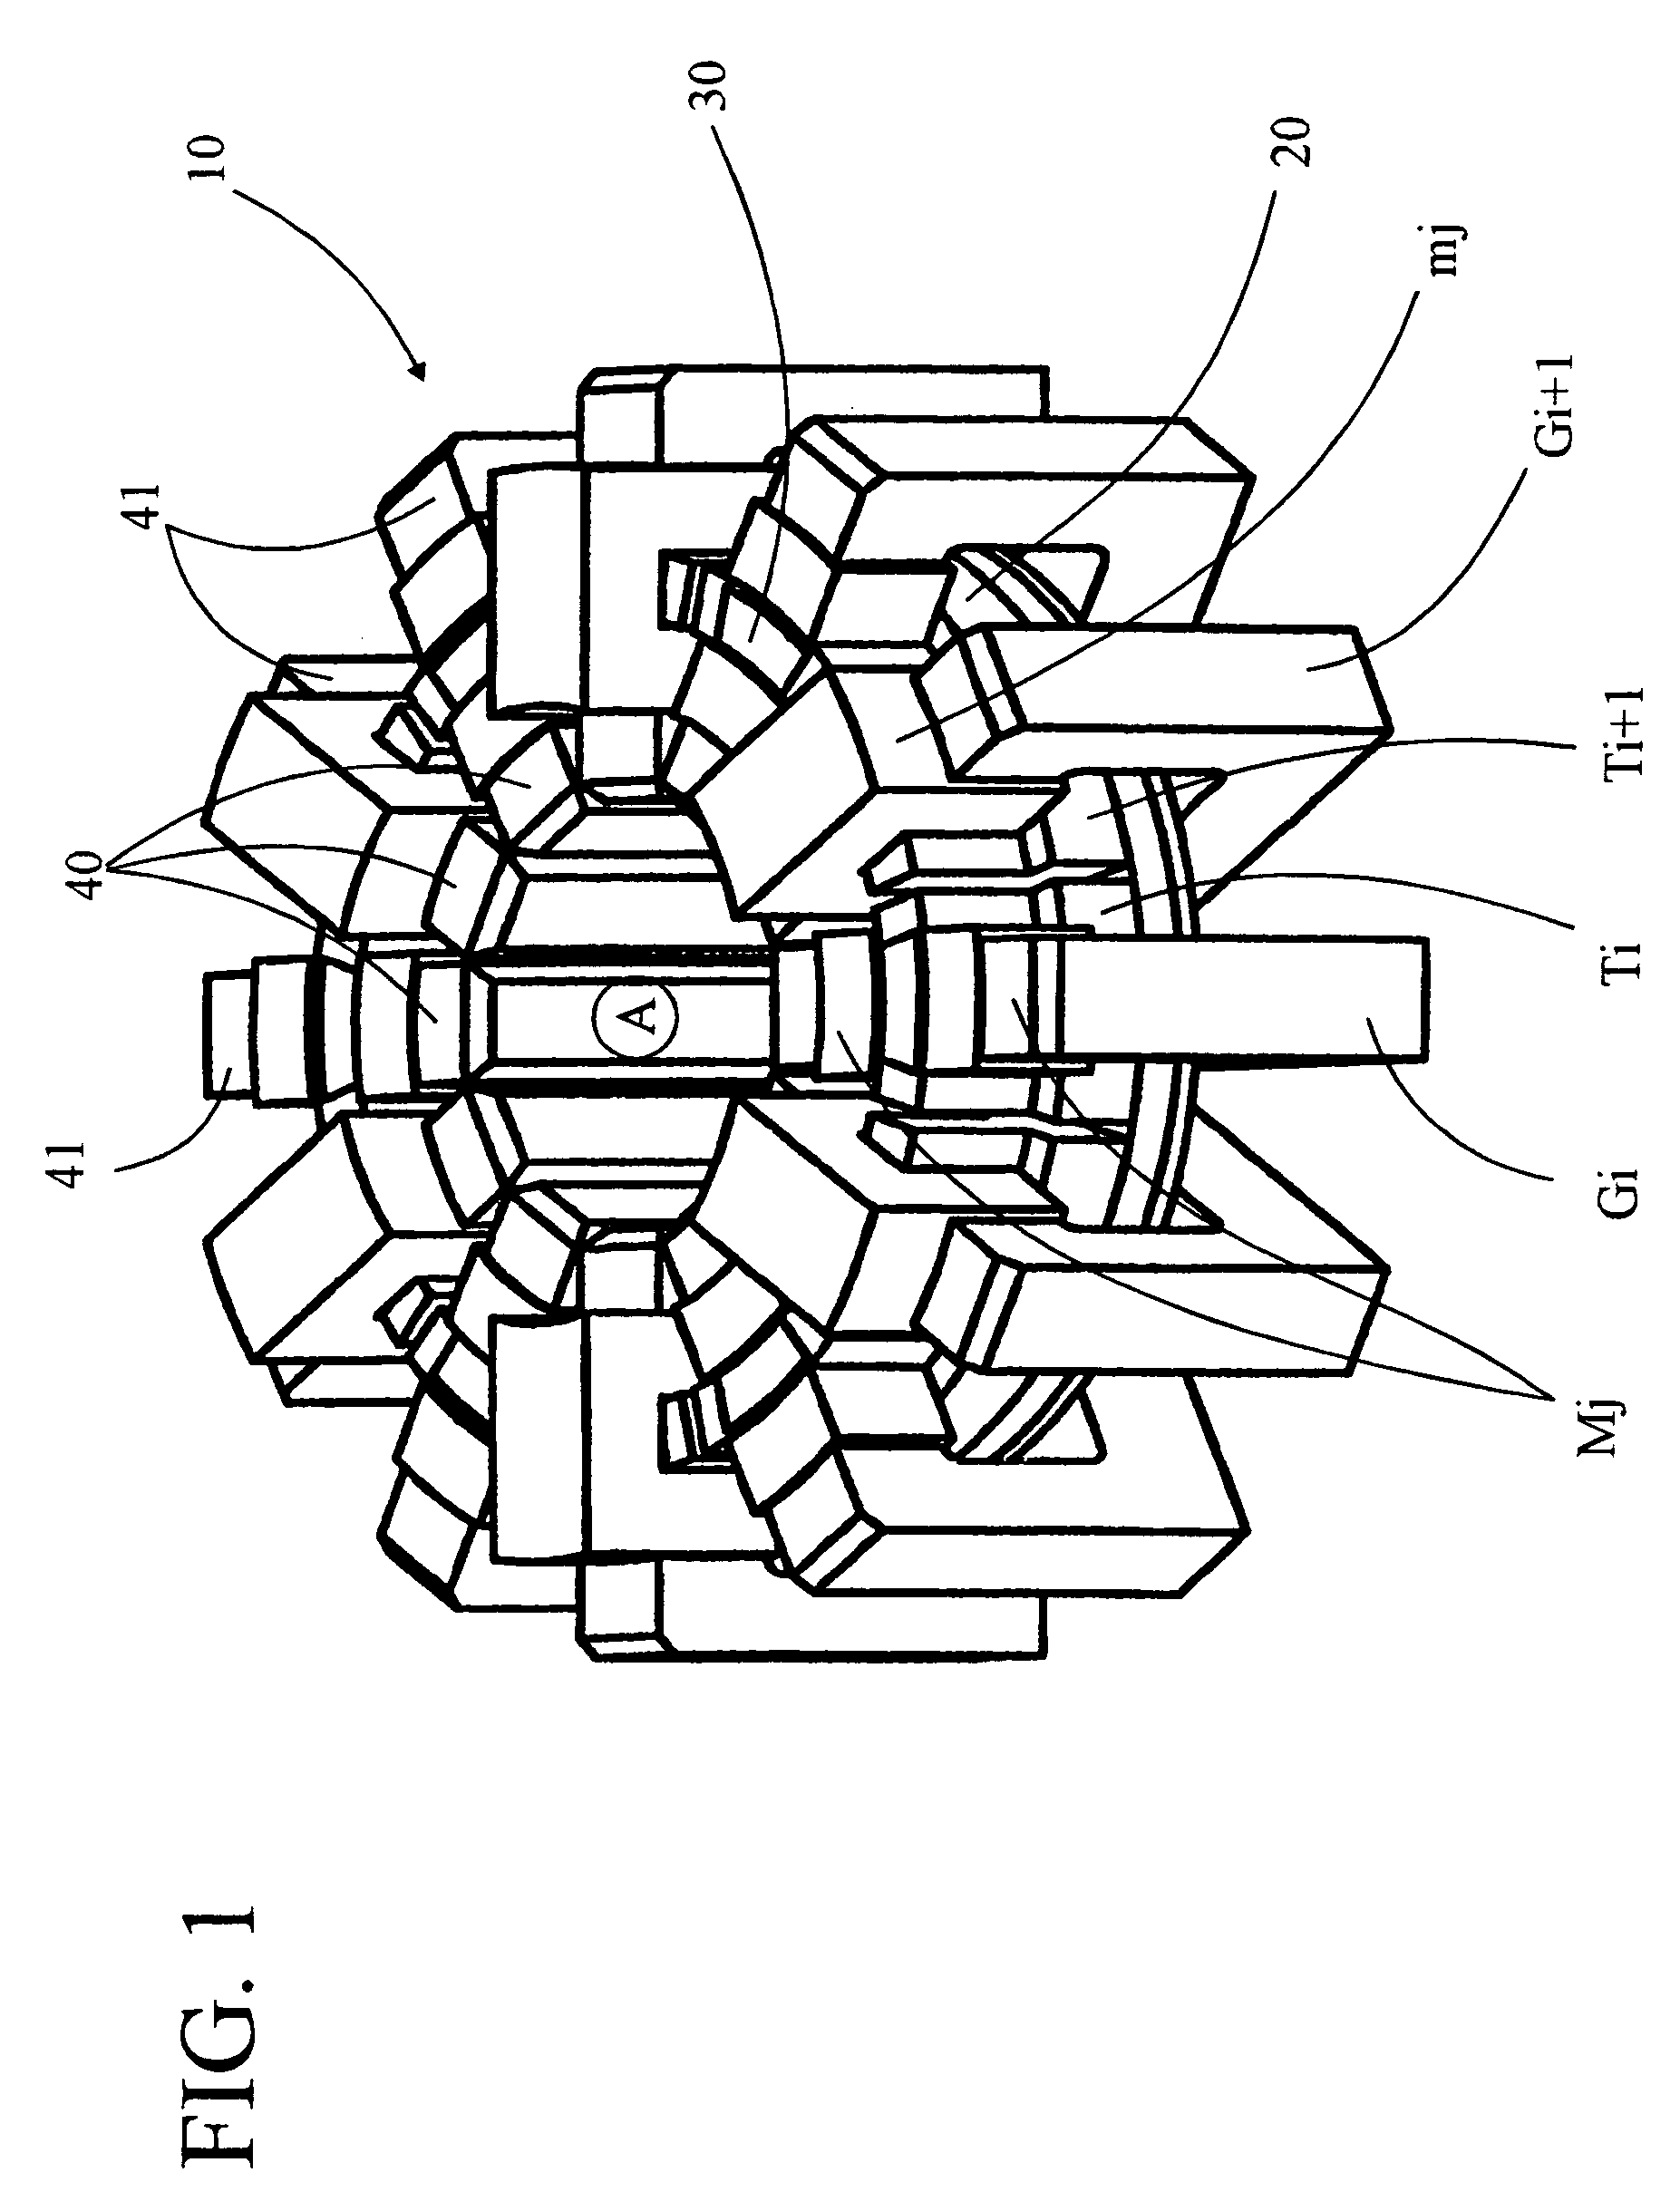 Heat generator comprising a magneto-caloric material and thermie generating method